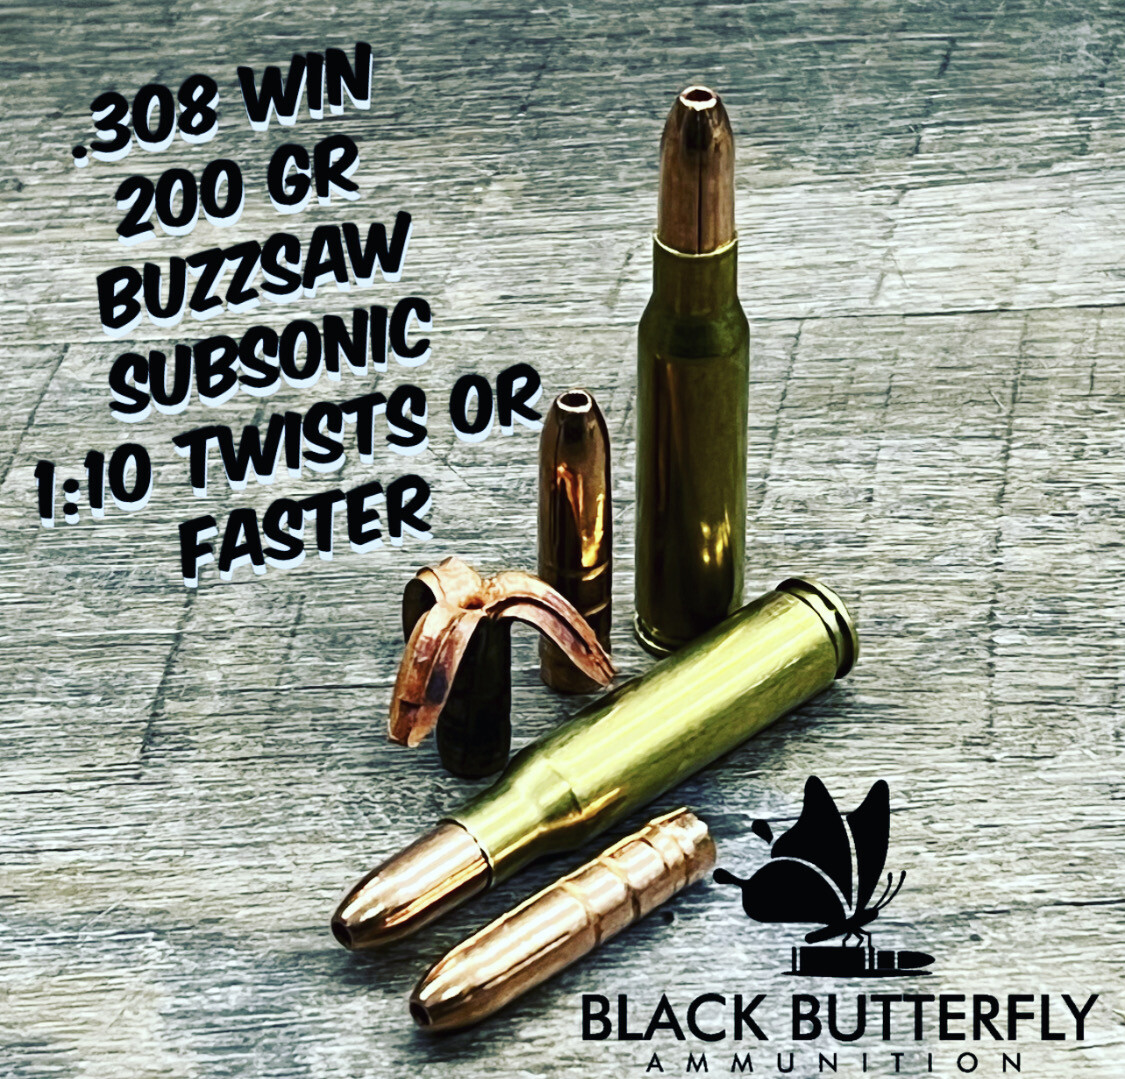 Black Butterfly Ammunition, .308/7.62x51mm, 200 gr., 20 Rounds, SUBSONIC MAKER EXPANDING COPPER &quot;BUZZSAW&quot; (1095 AMV) 1:10 OR FASTER TWIST